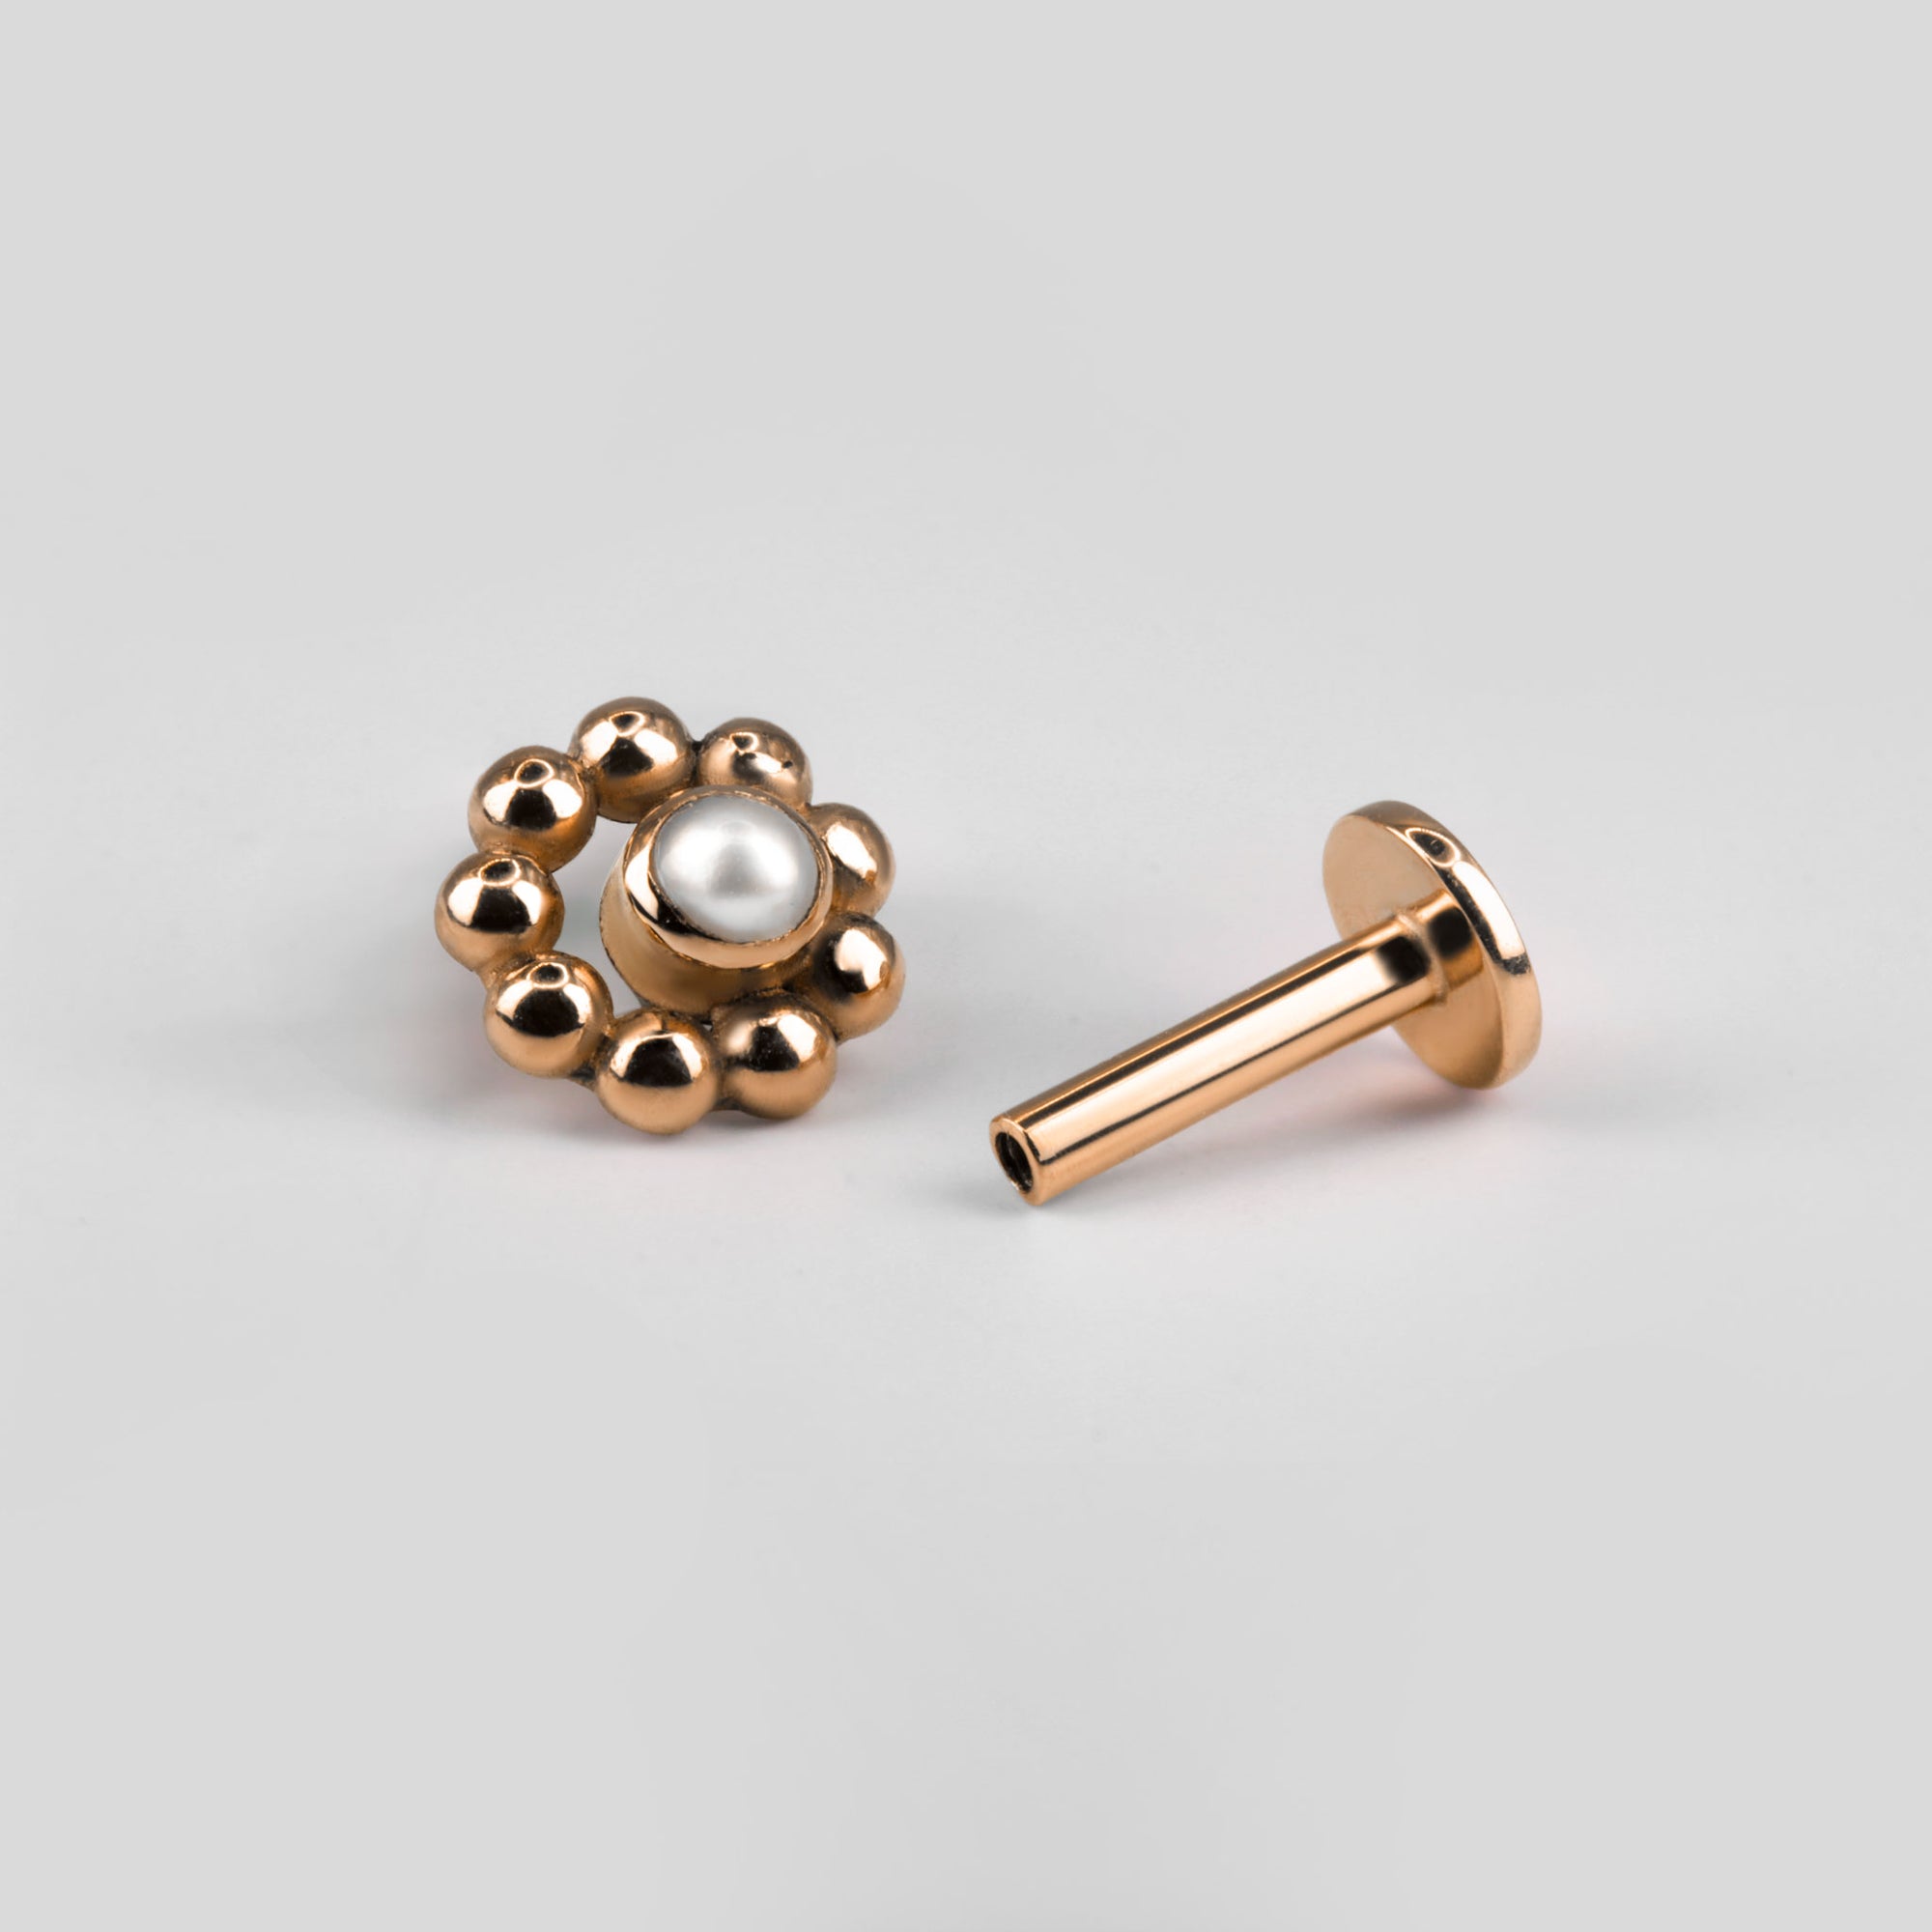 Circular beaded ear piercing in 18k rose gold with pearl